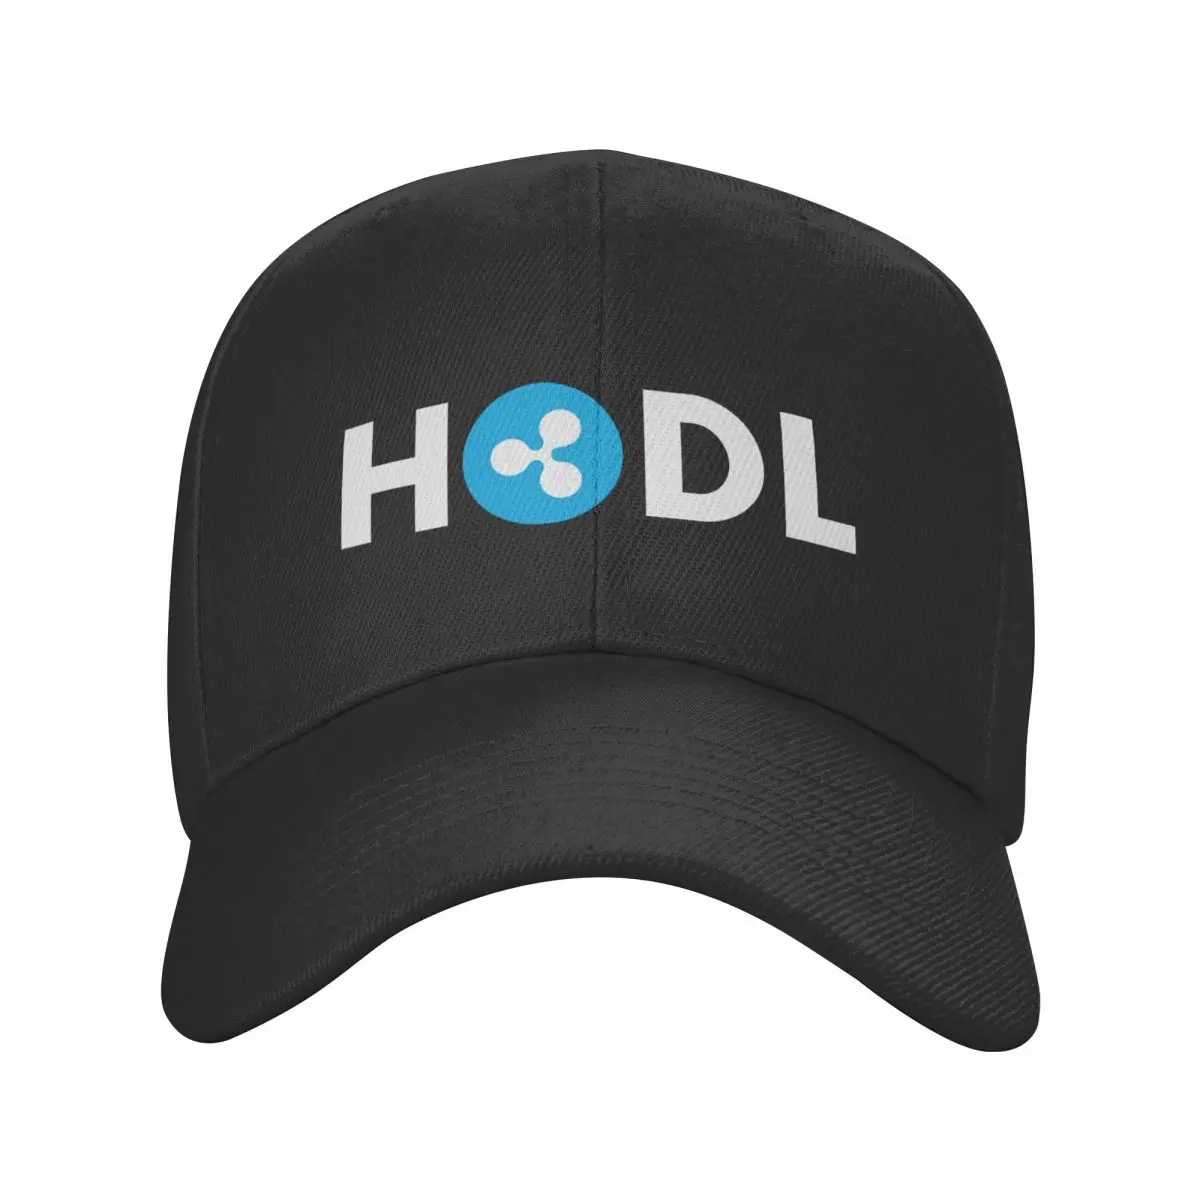 

Classic Ripple Xrp Hodl Crypto To The Moon Baseball Cap Adjustable Adult Bitcoin Dad Hat Spring Snapback Hats Trucker Caps